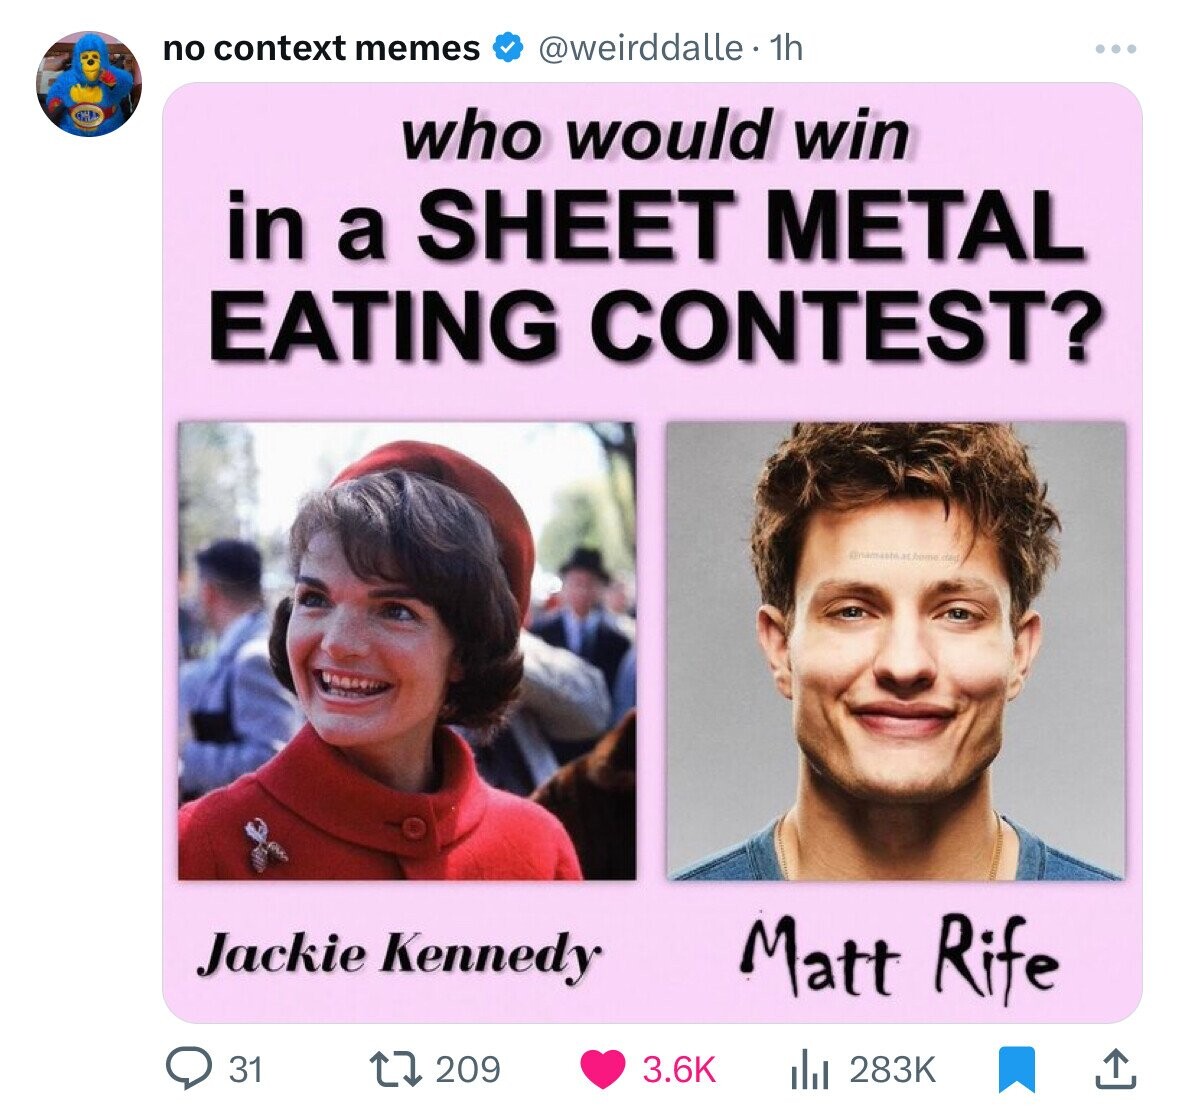 smile - Cha no context memes . 1h who would win in a Sheet Metal Eating Contest? ww 31 haser Jackie Kennedy 209 namast at home.dat Matt Rife il 1